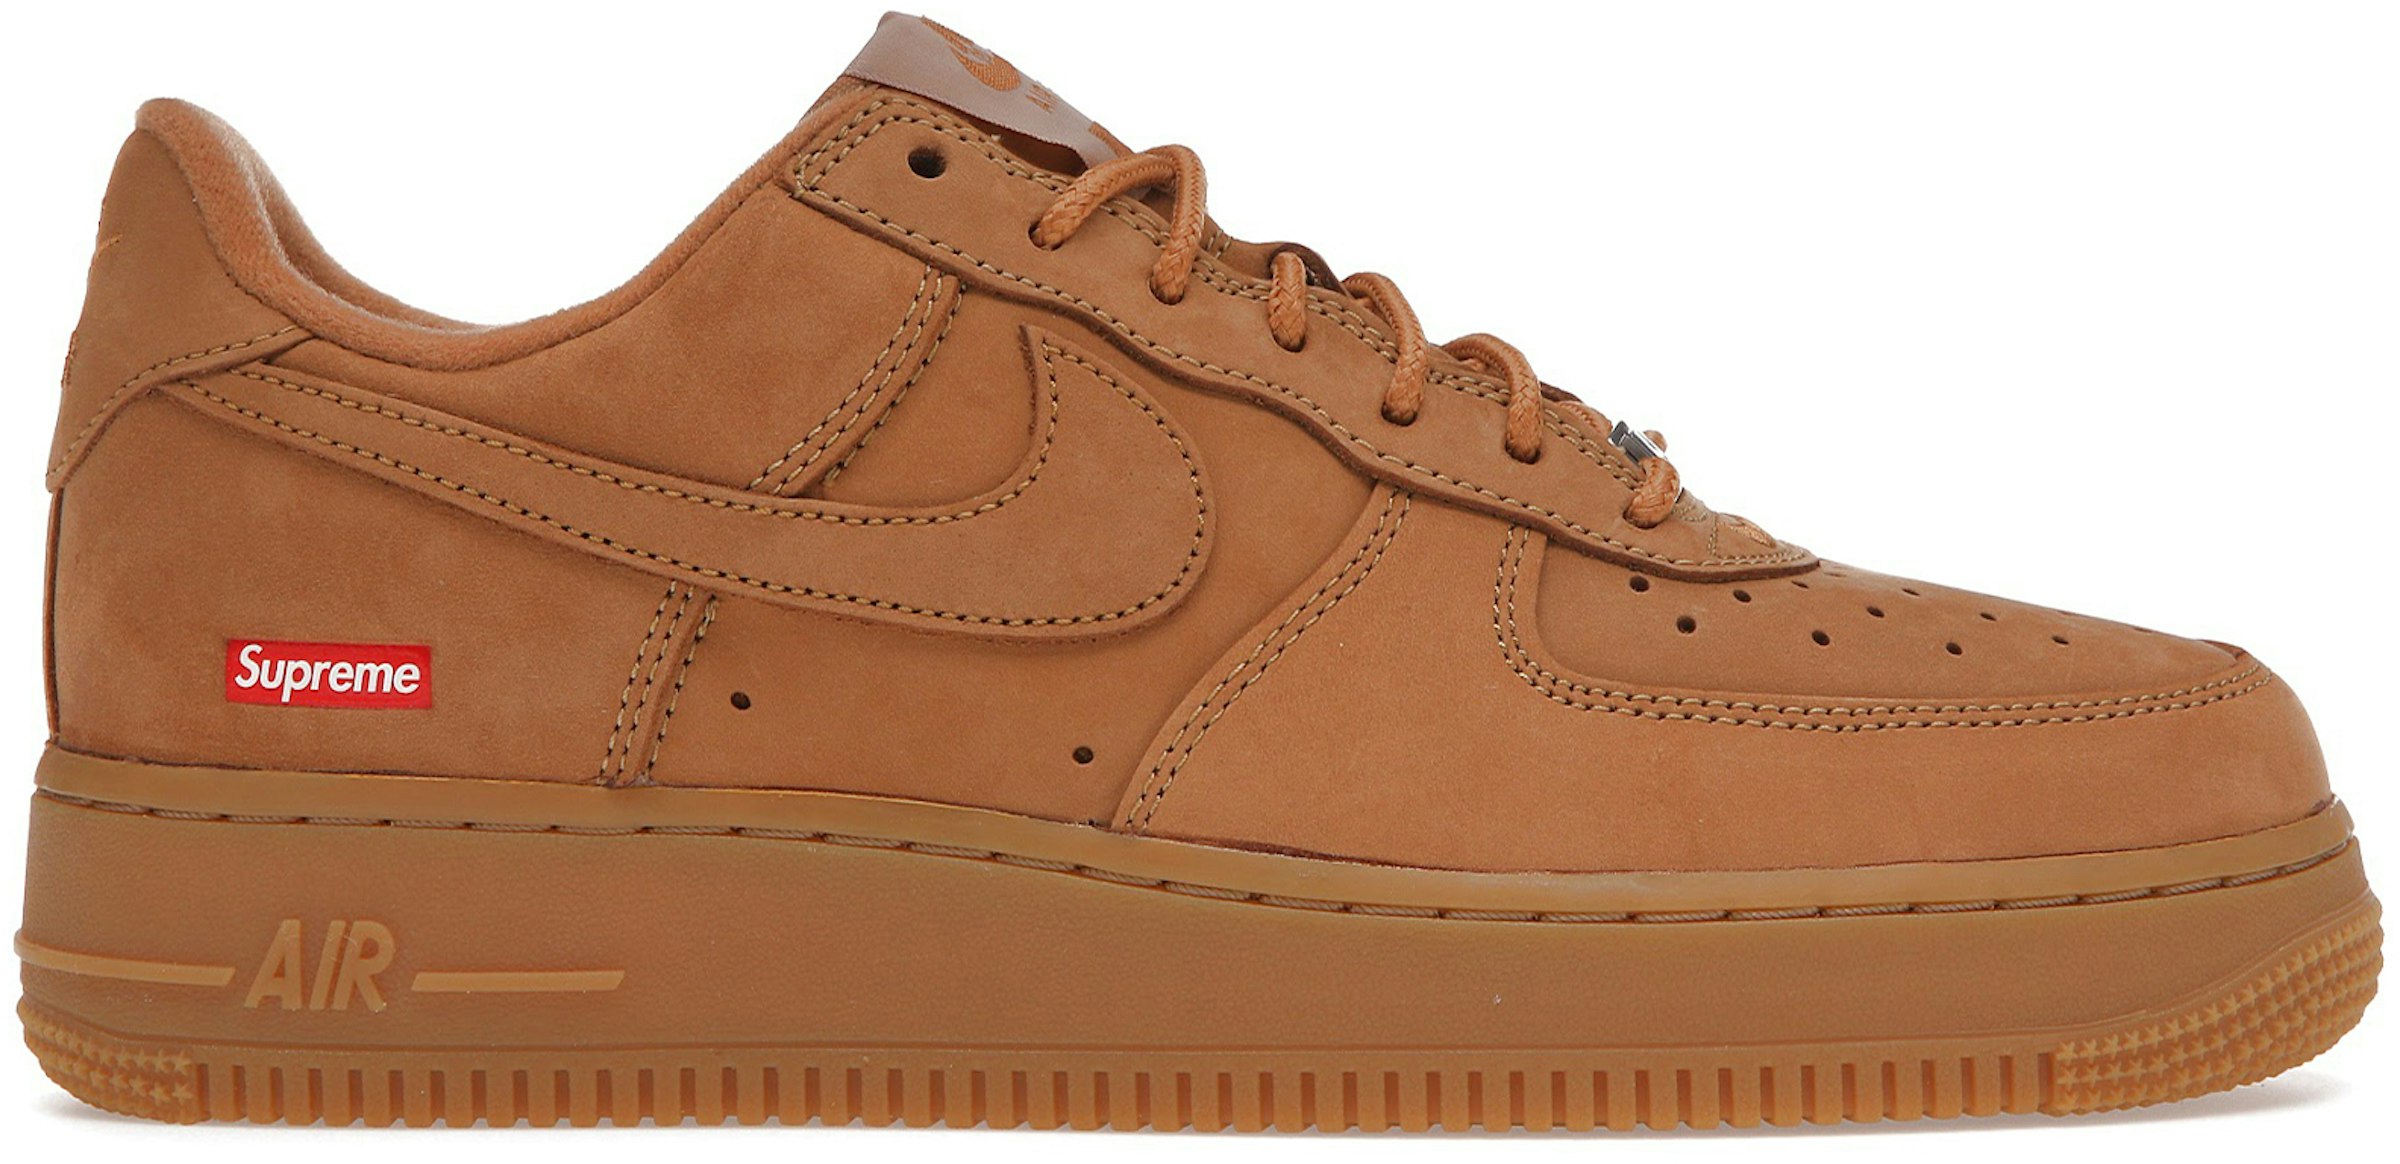 Nike Air Force Low SP Supreme Wheat - DN1555-200 - US